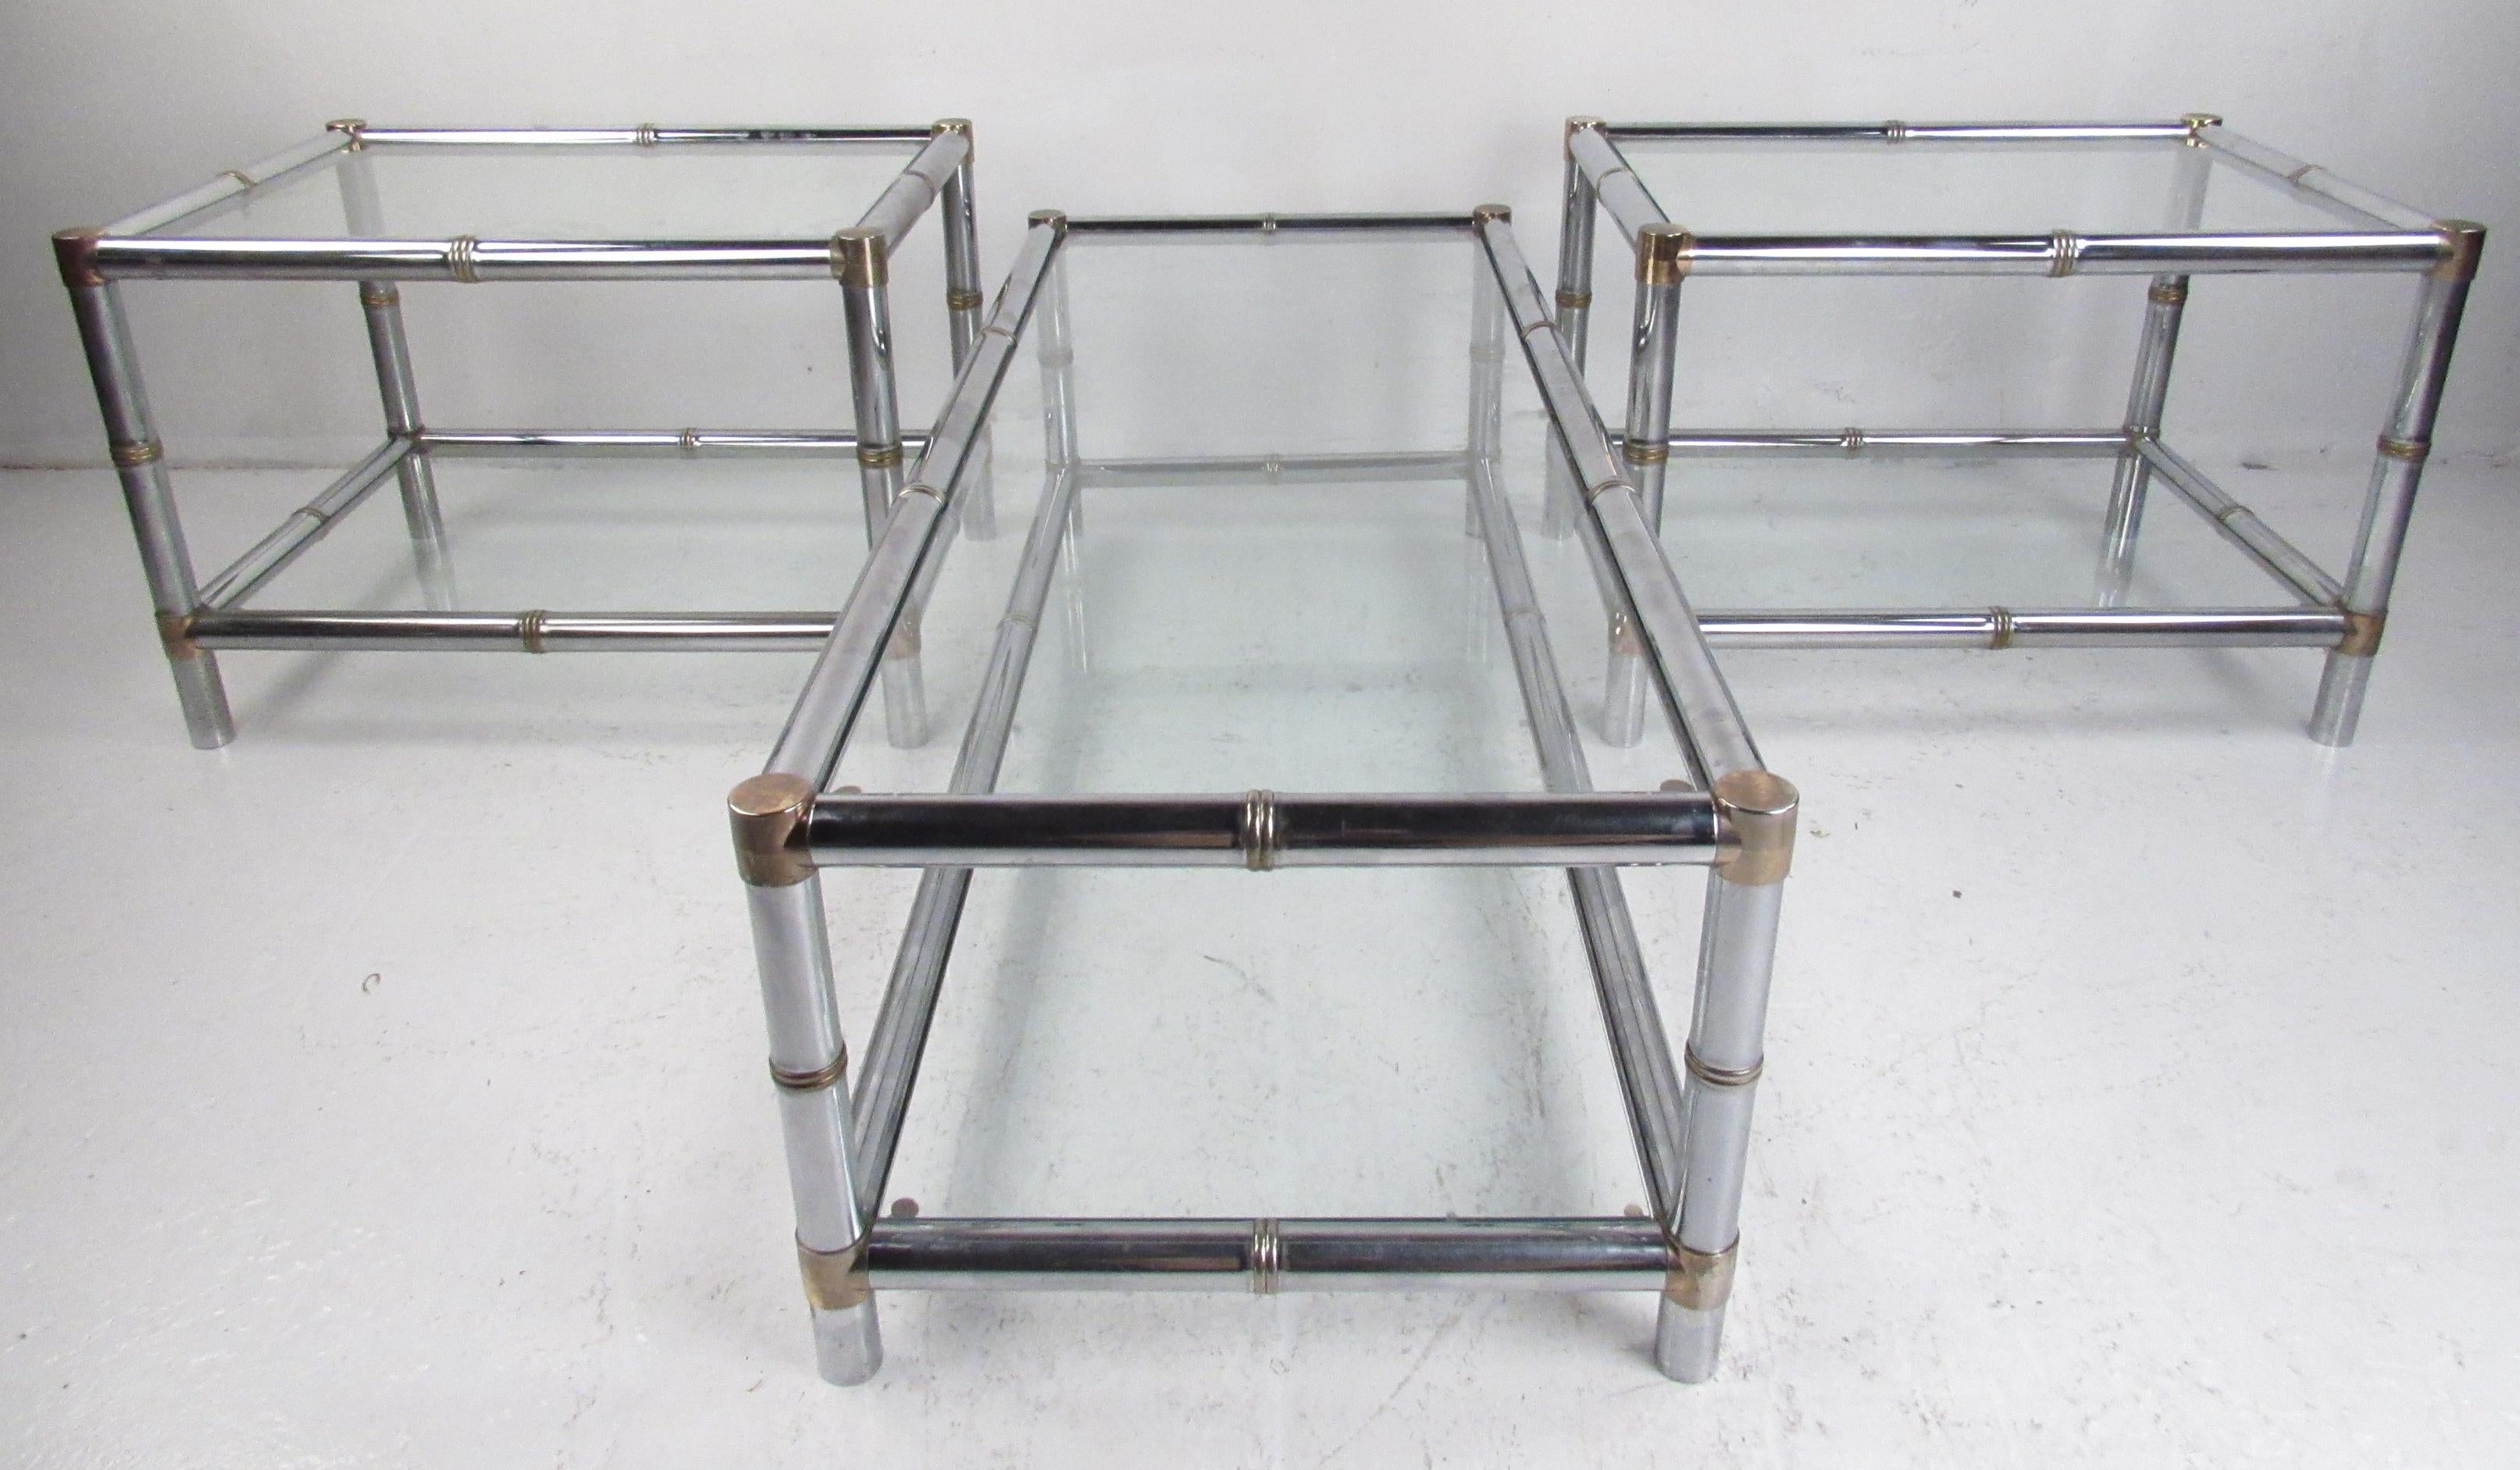 Vintage set of two end tables and long coffee table with heavy chrome faux bamboo frames and glass shelves. Pair of end tables are 28.25